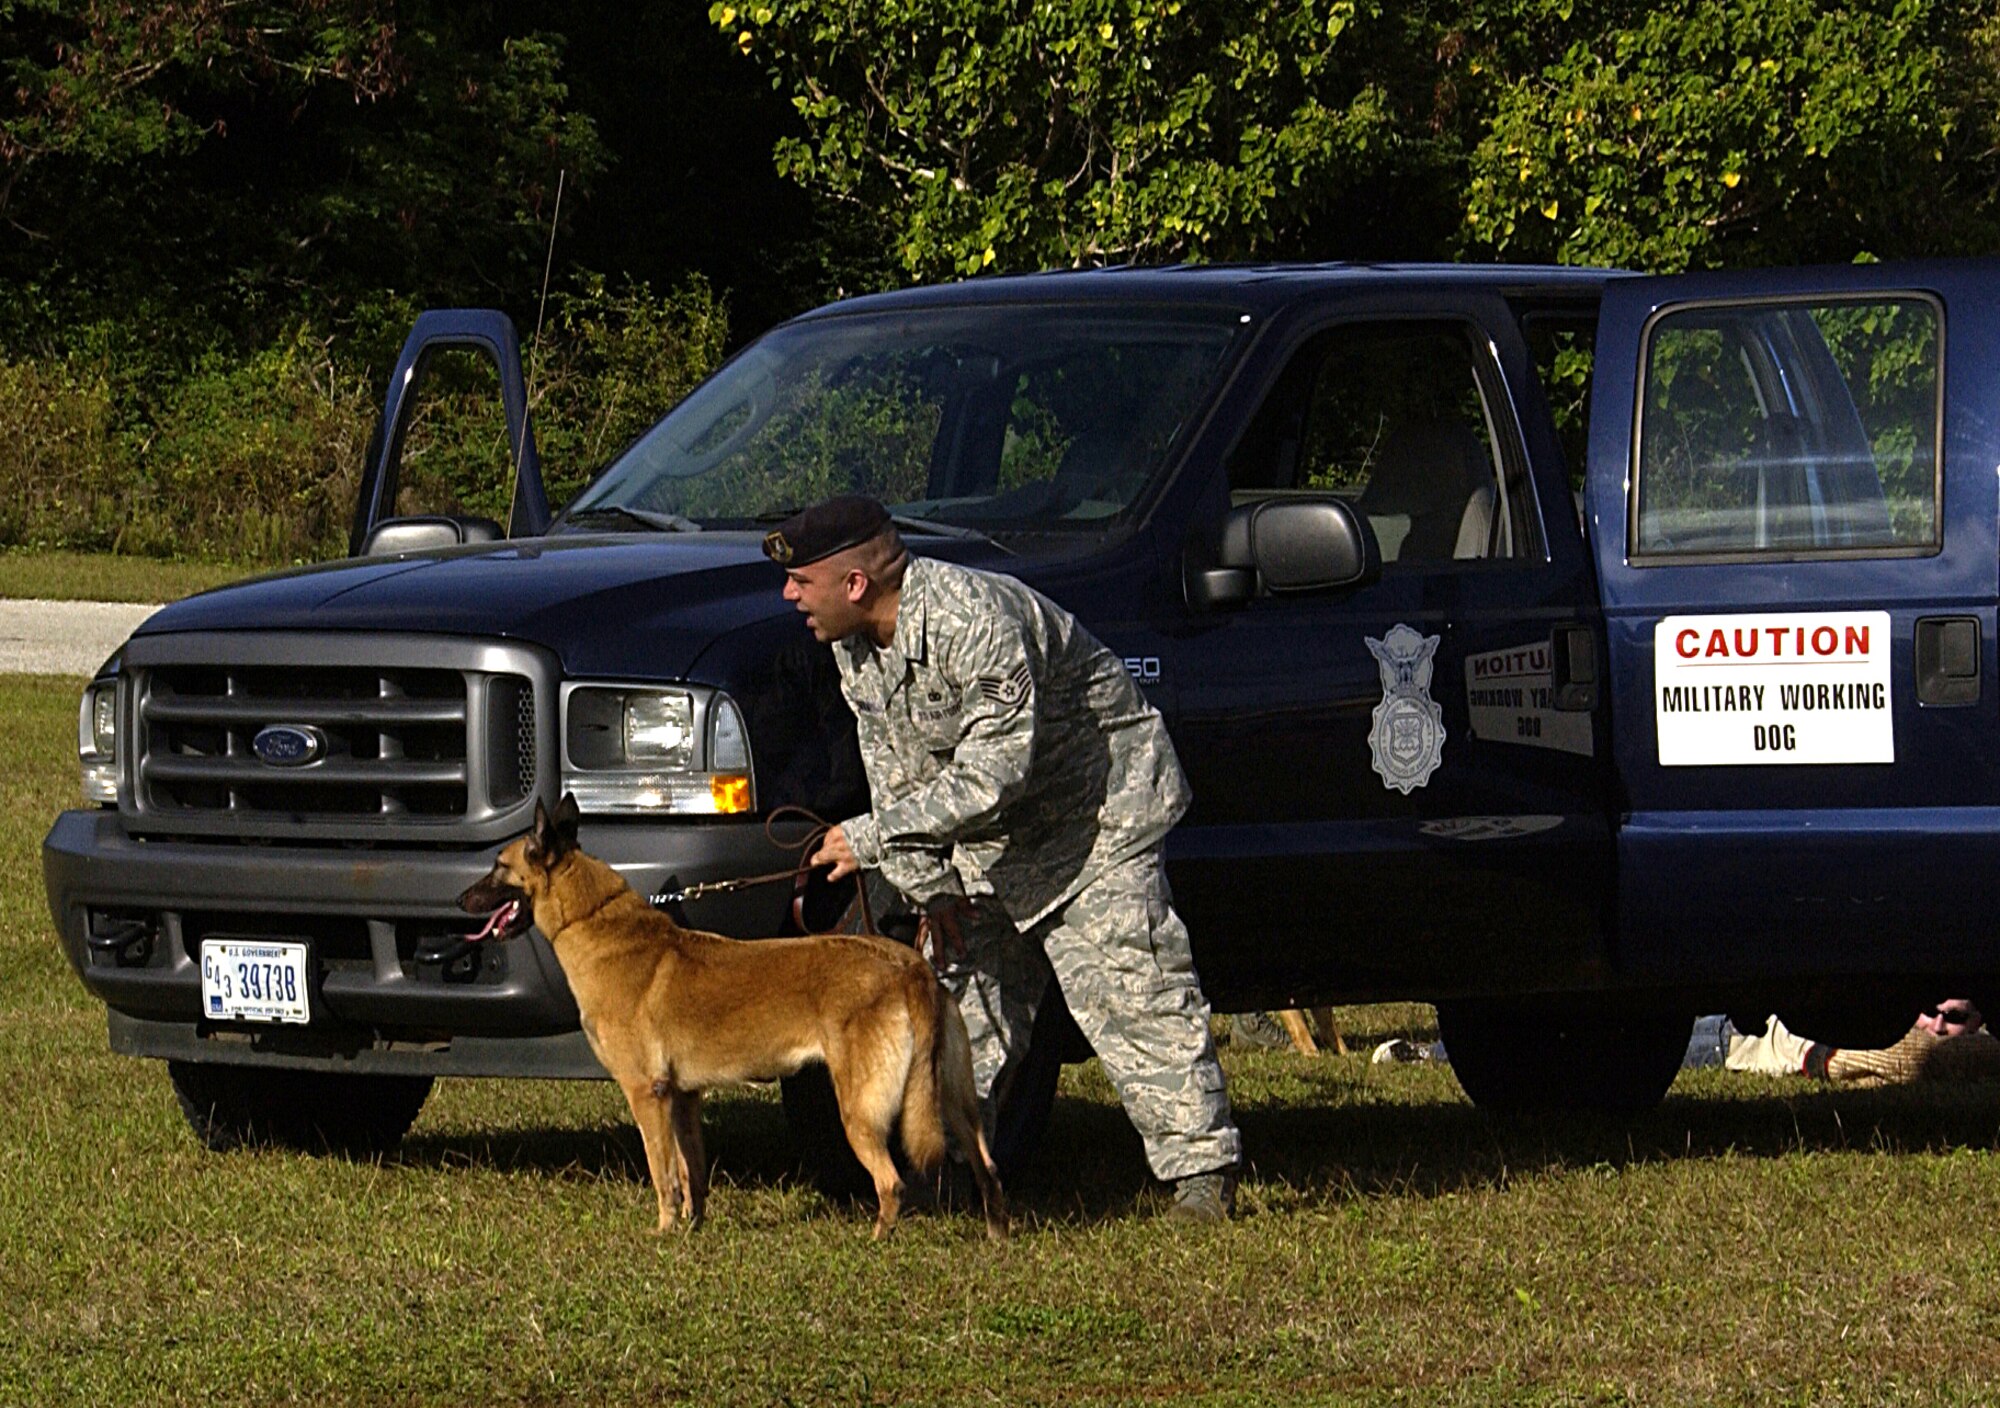 ANDERSEN AIR FORCE BASE, Guam -- Staff Sgt. Jorge Davila, 36th Security Forces Squadron military working dog handler, prepares his partner Cila to catch a perpetrator during a MWD competition here Feb. 2. The MWD competition was the first event of its kind held on Andersen.  The competition featured four 36th SFS MWD teams, one United States Department of Agriculture team and 36th SFS personnel volunteering as opposing forces. (U.S. Air Force photo by Airman 1st Class Carissa Wolff)